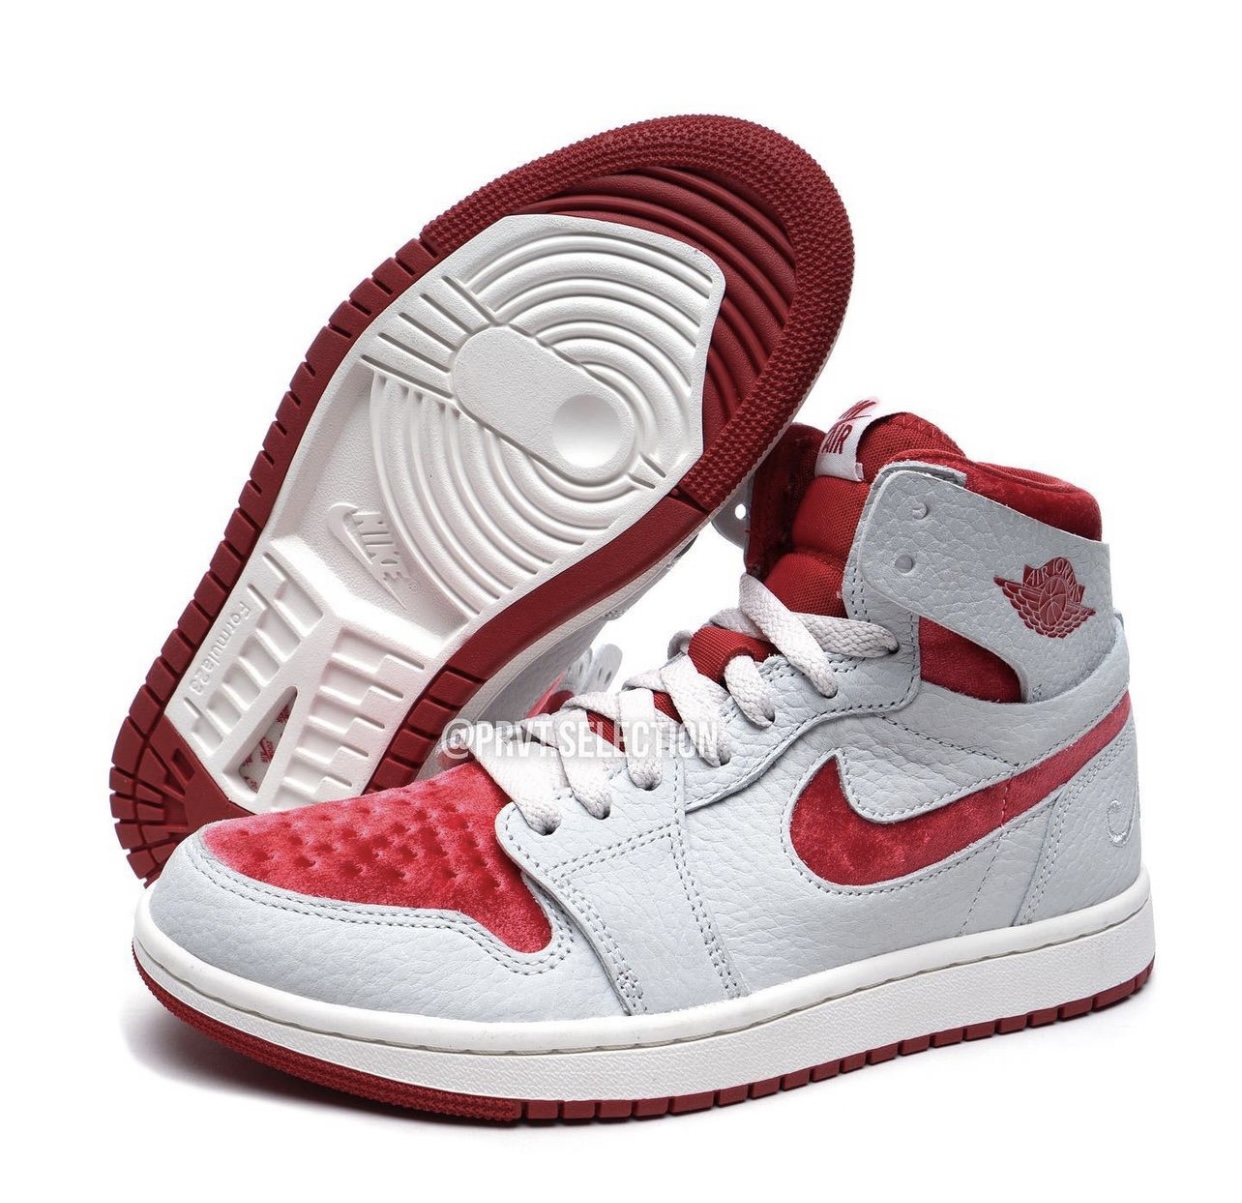 Air Jordan 1 High Zoom CMFT 2 Anytime Anywhere Valentines Day Release Date